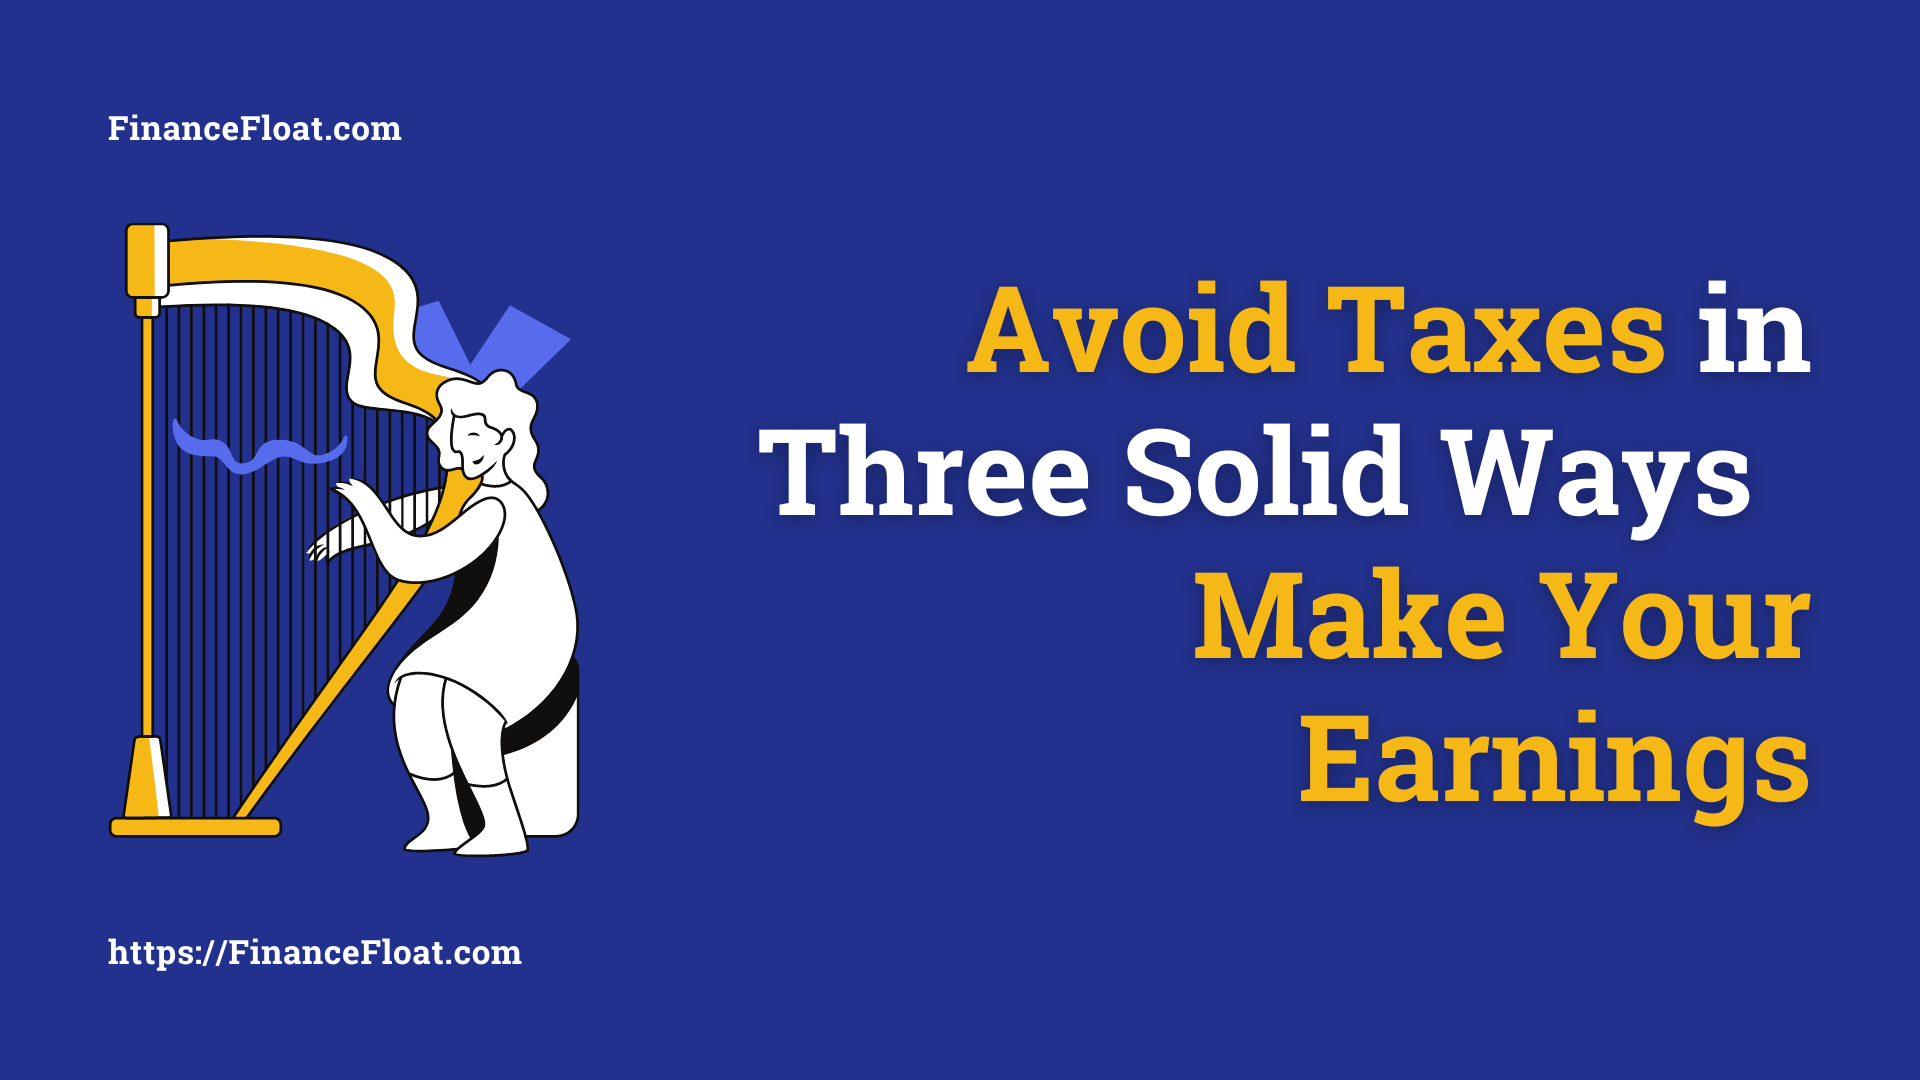 Avoid Taxes in Three Solid Ways Make Your Earnings